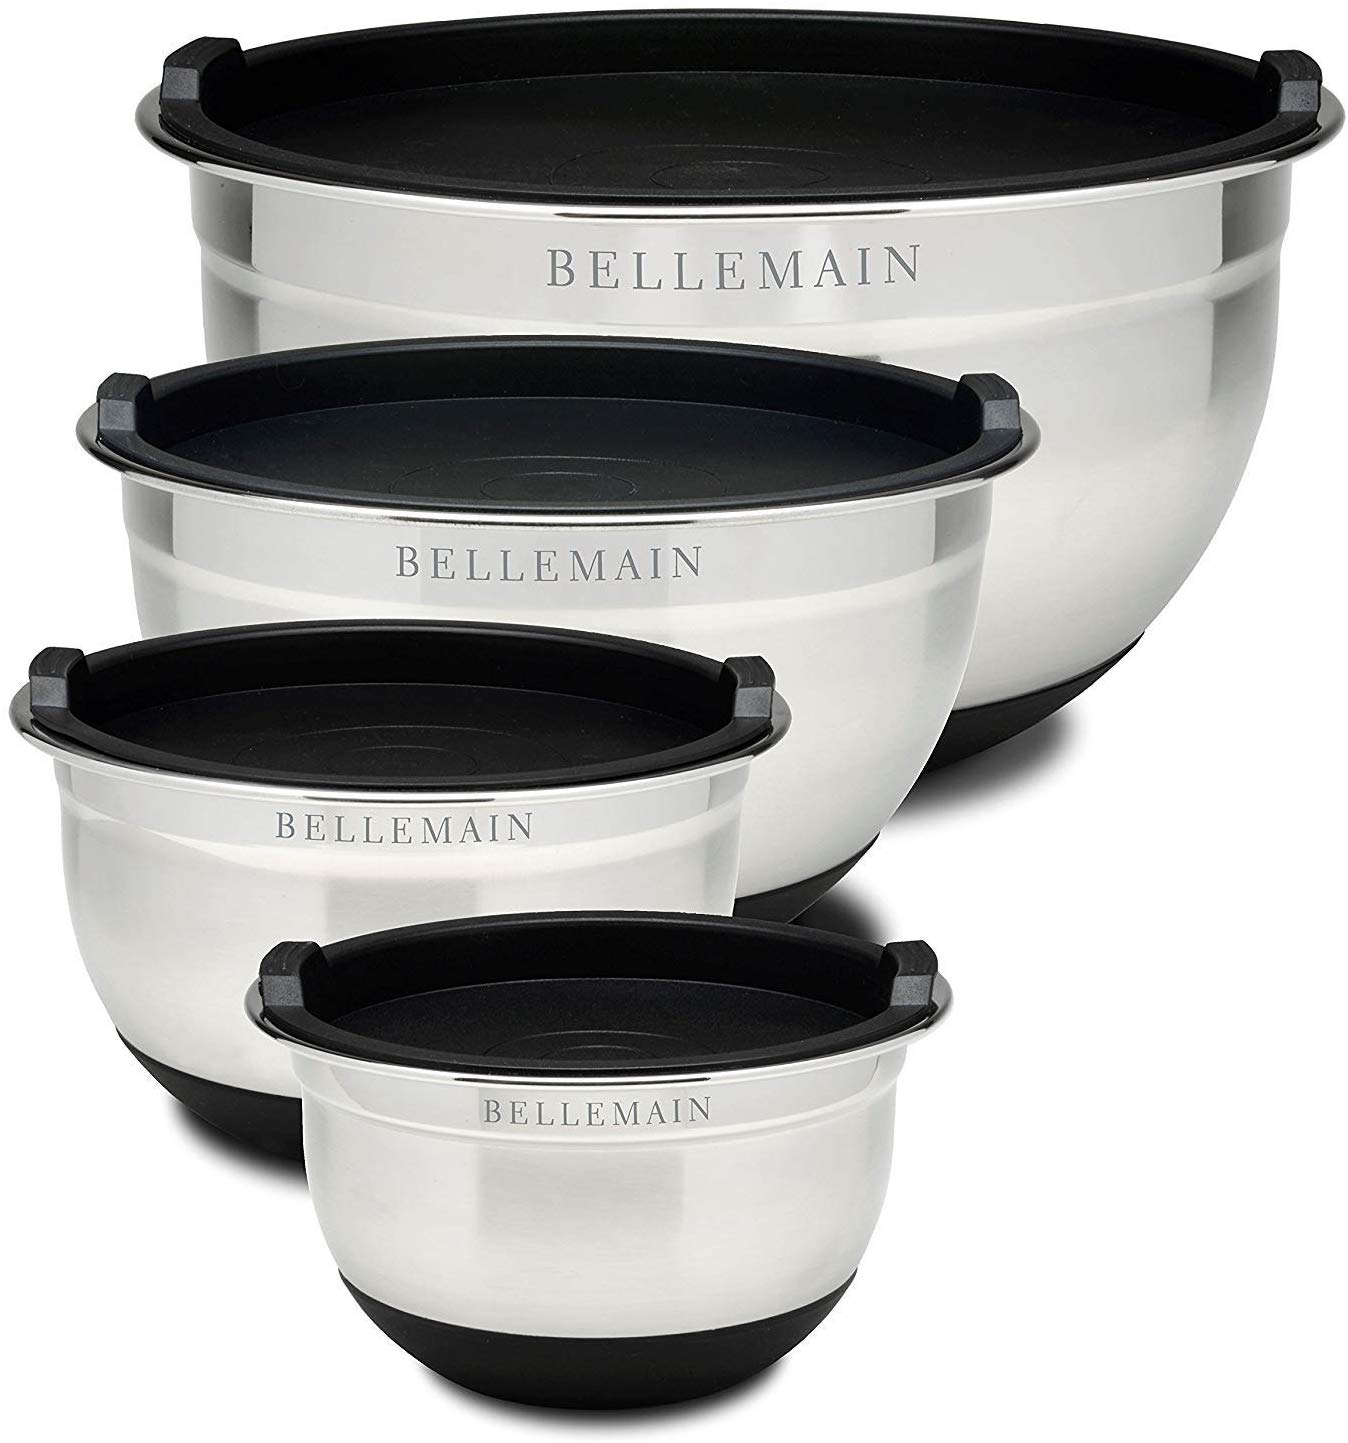 Bellemain Stainless Steel Top Rated Mixing Bowl Set, 4-Piece